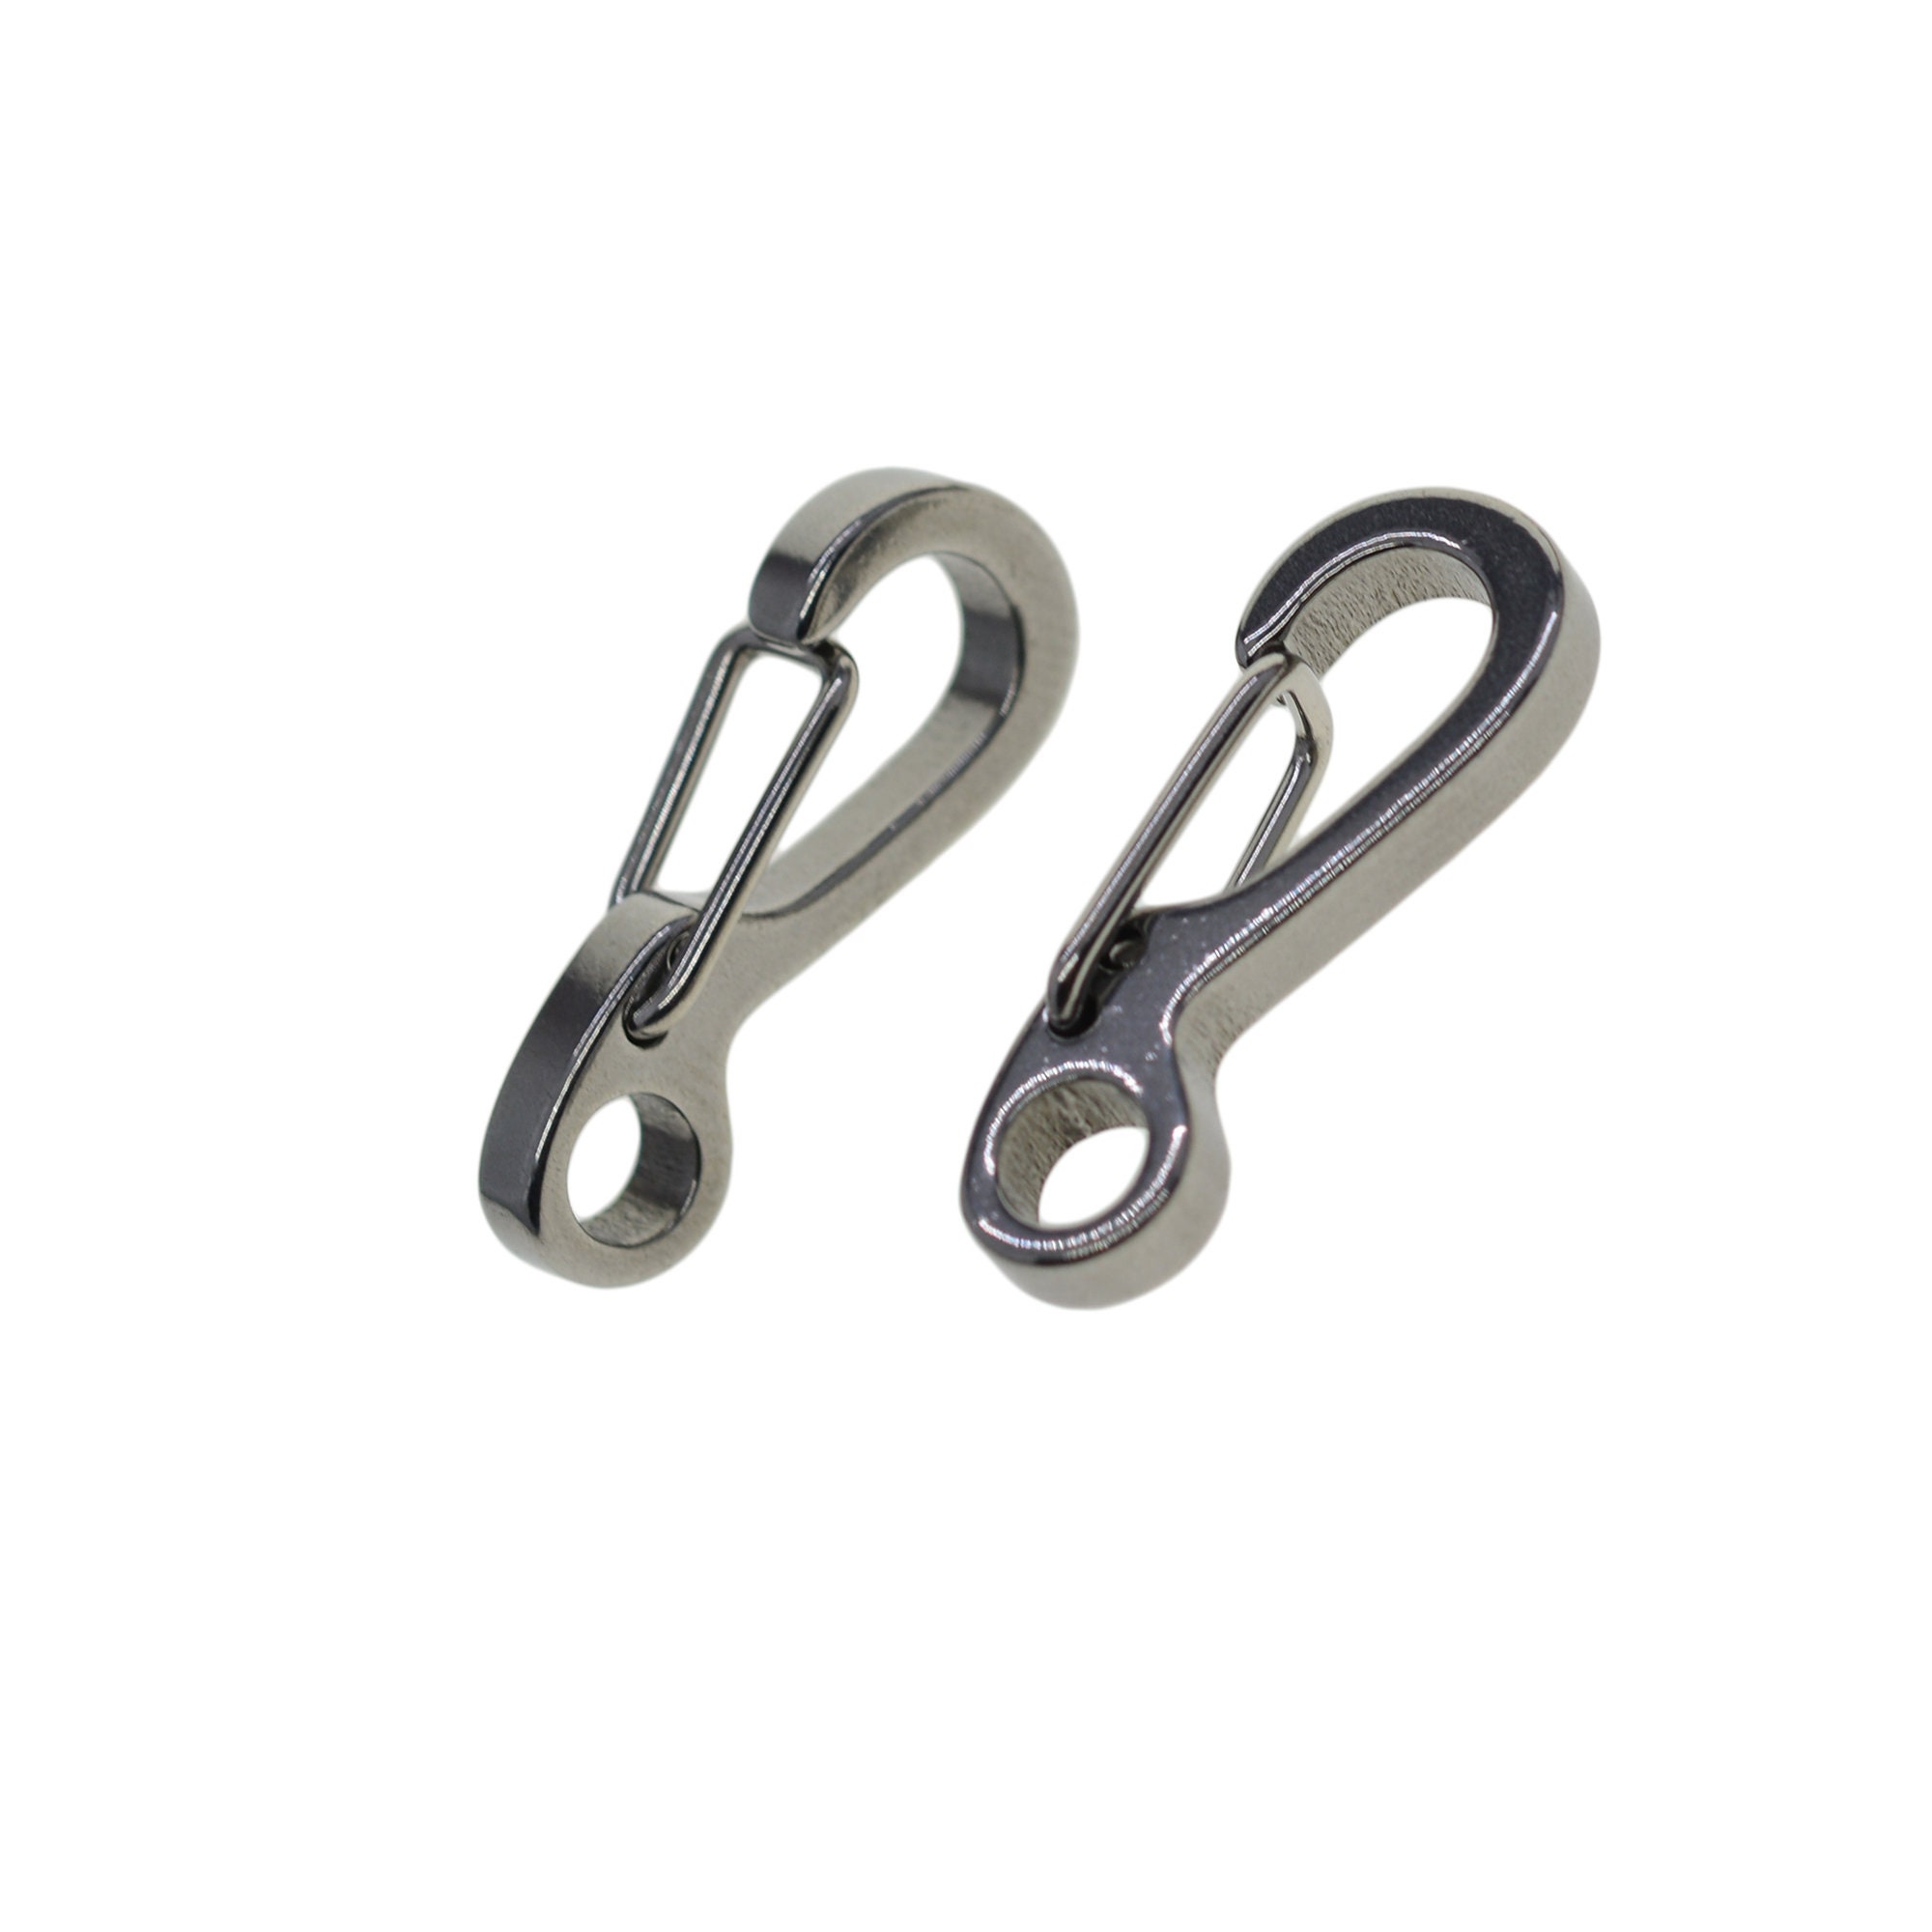 Small Carabiner Clip,12 PCS Mini Carabiner,Stainless Steel Spring Snap  Hooks,1.57 Inch Caribeener Clips for Rope Flag Pole (1.57inch-12PCS)